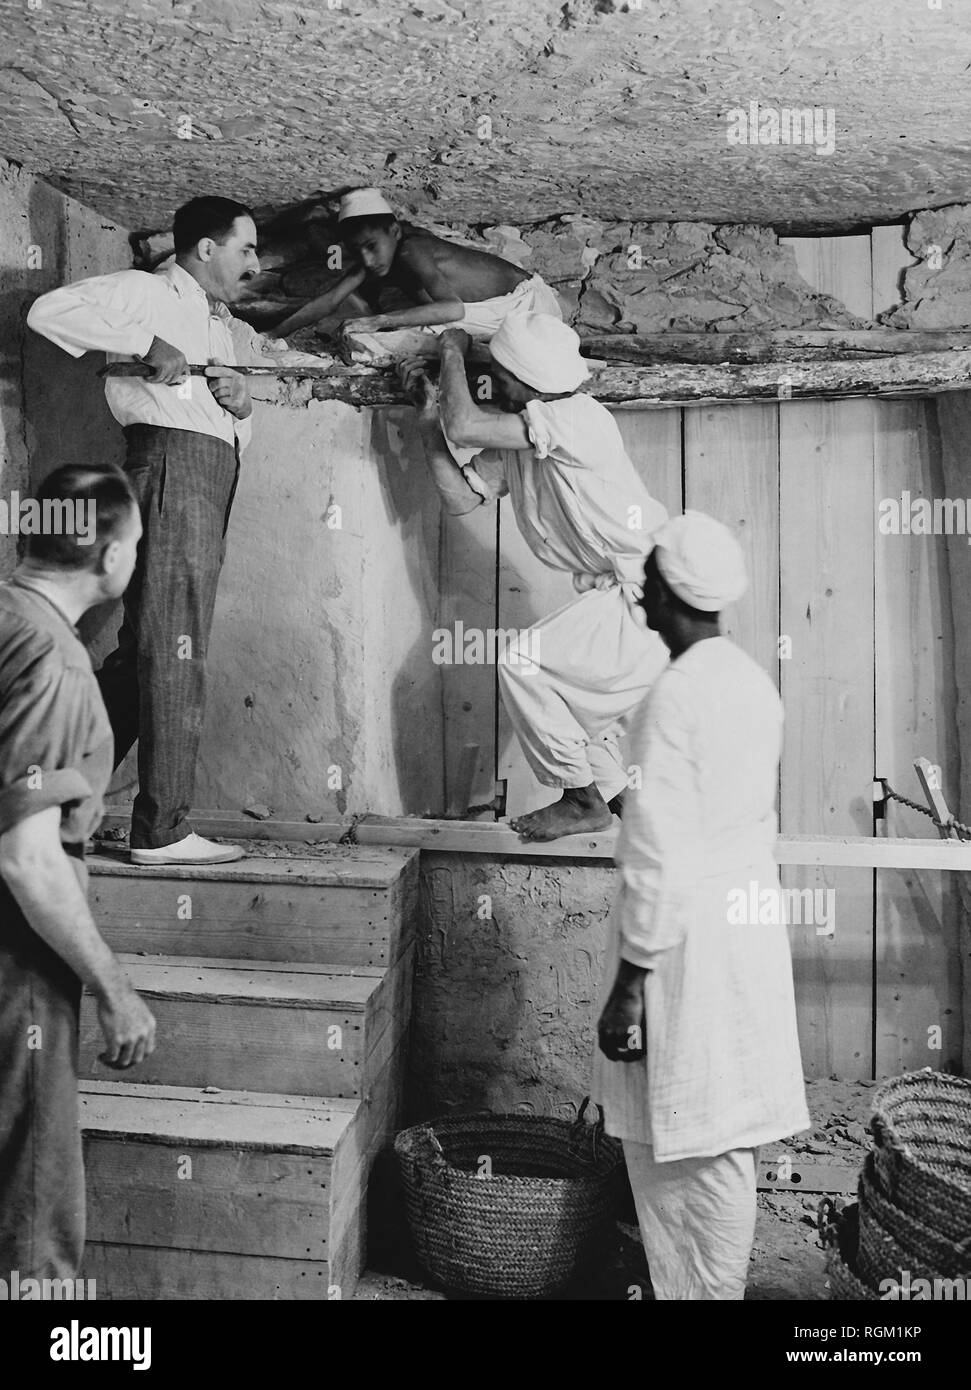 Howard Carter who discovered Tutankhamun's Tomb in the Valley of the Kings, Luxor, Egypt. November 1922. Carter using a pry bar inside the tomb. Scanned from image material in the archives of Press Portrait Service (formerly Press Portrait Bureau) Stock Photo